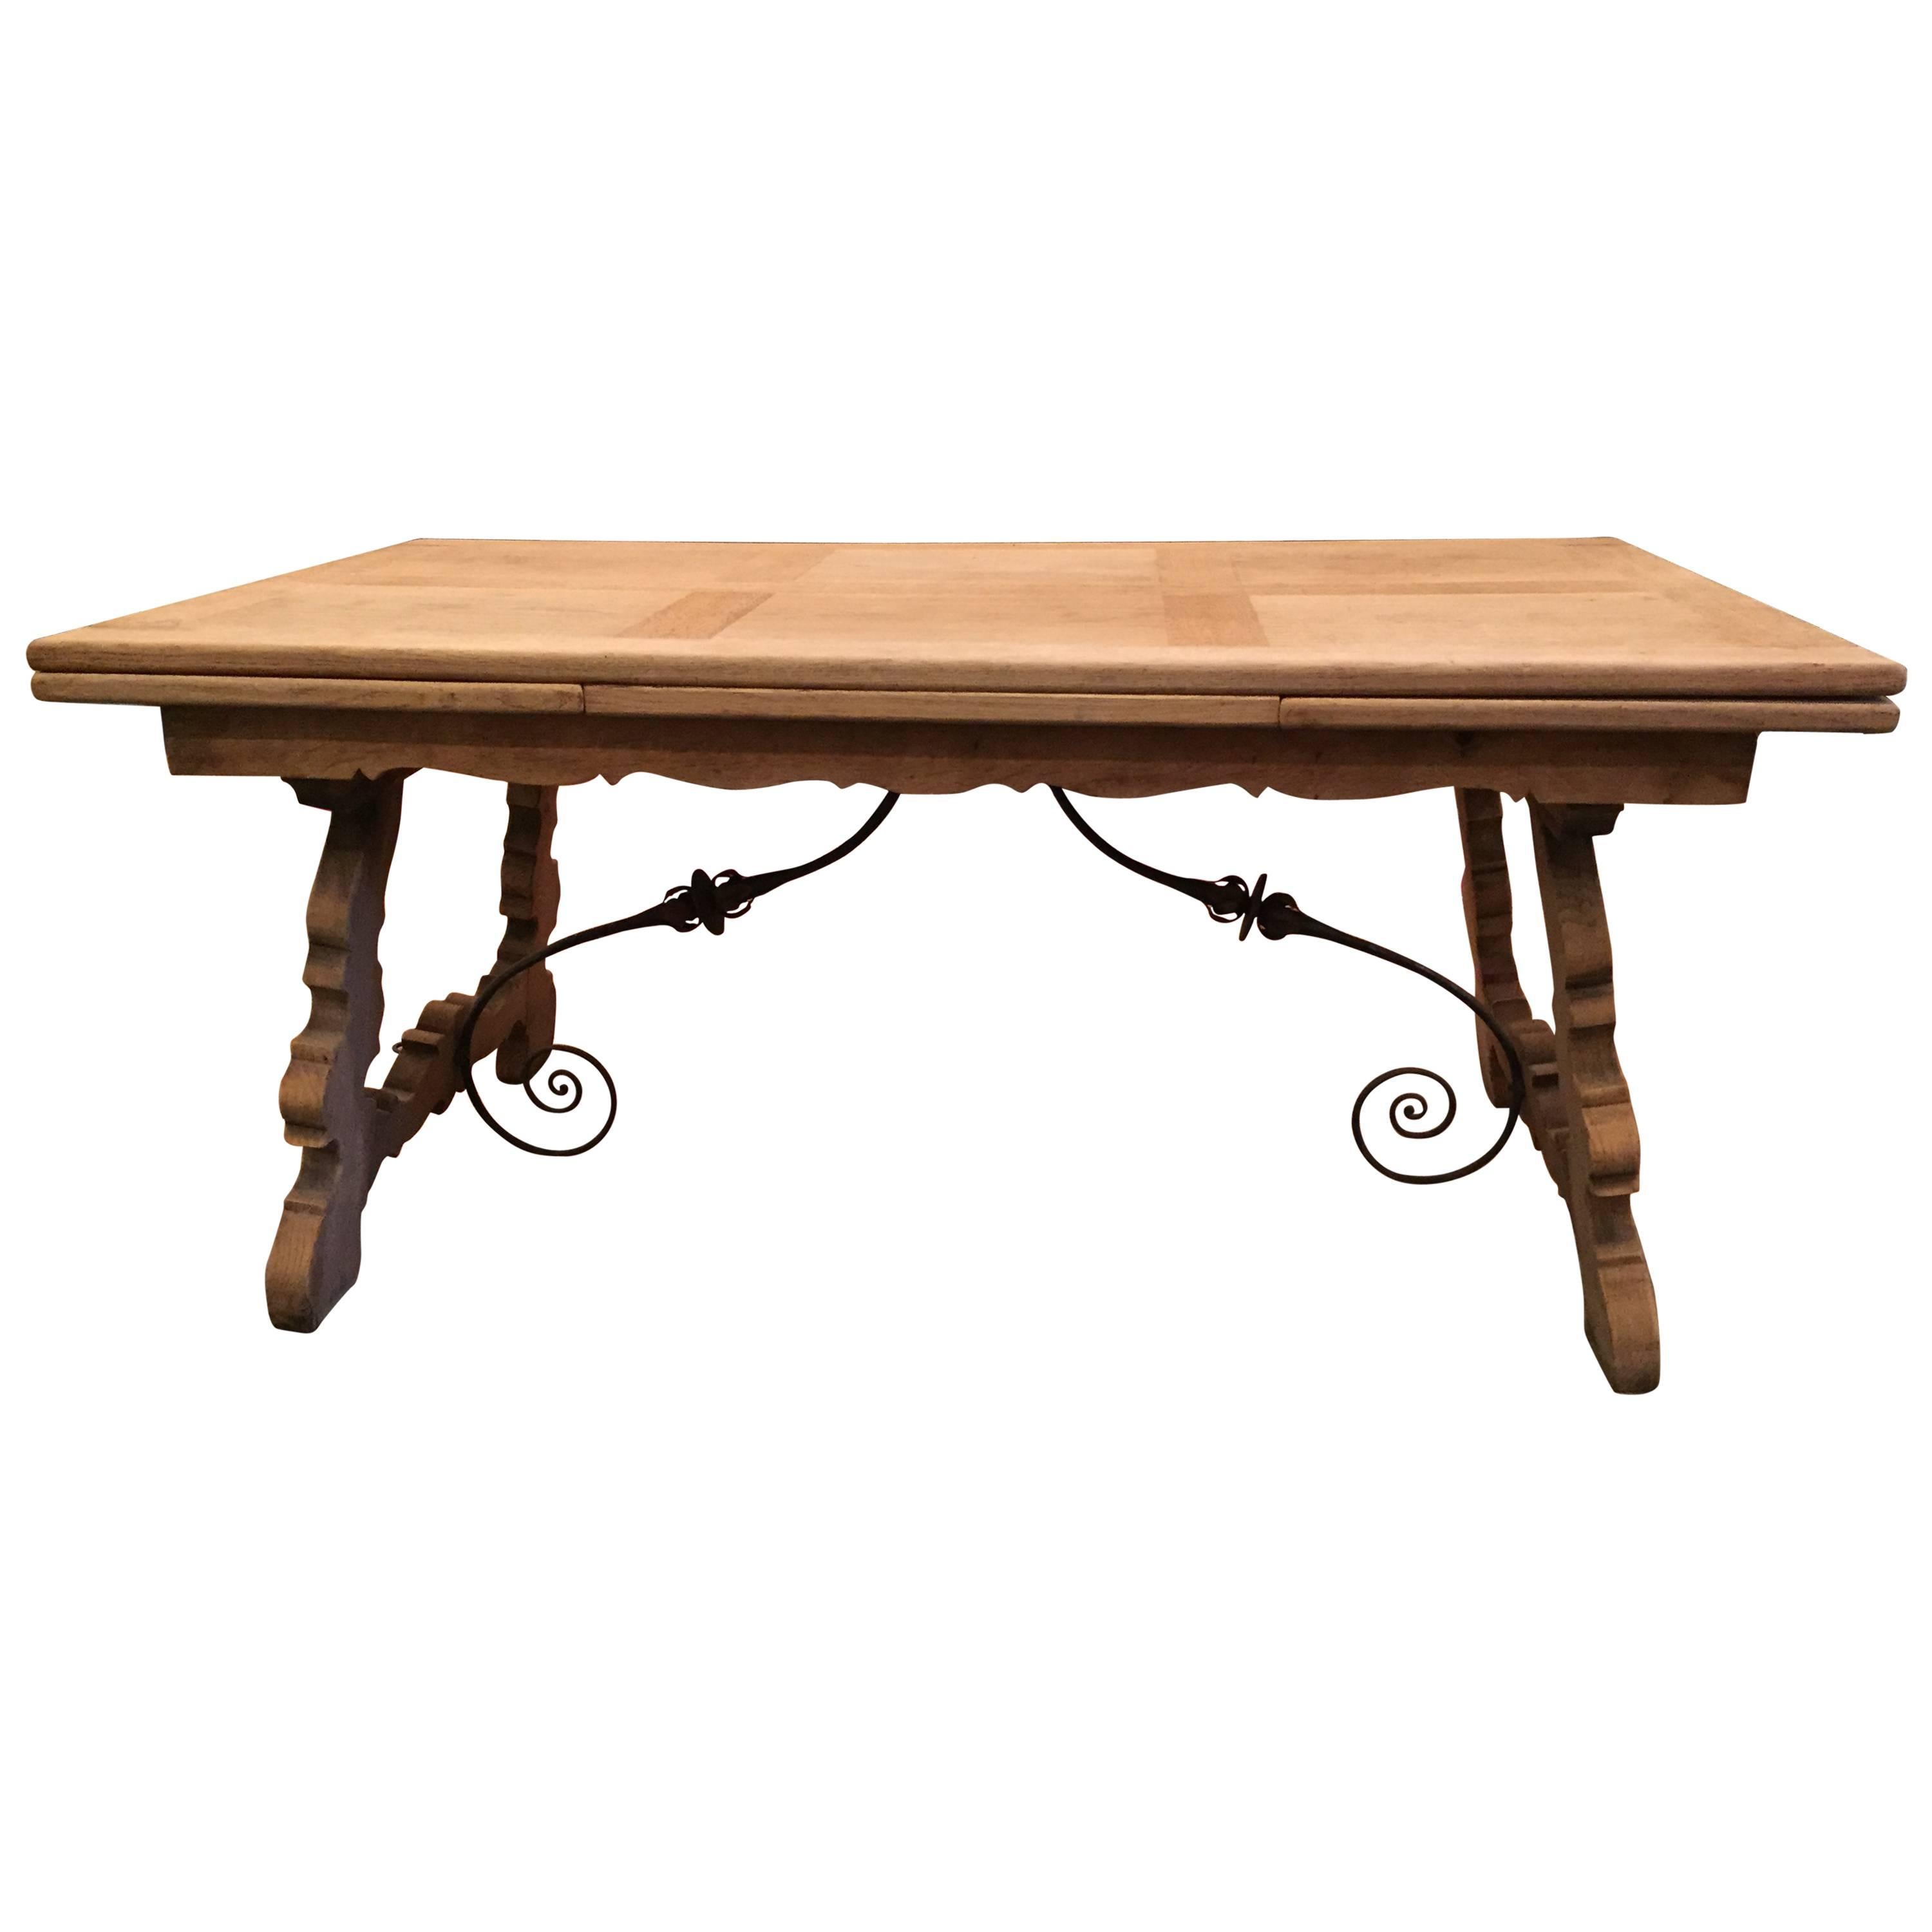 19th Century Spanish Draw-Leaf Trestle Table in Bleached Oak